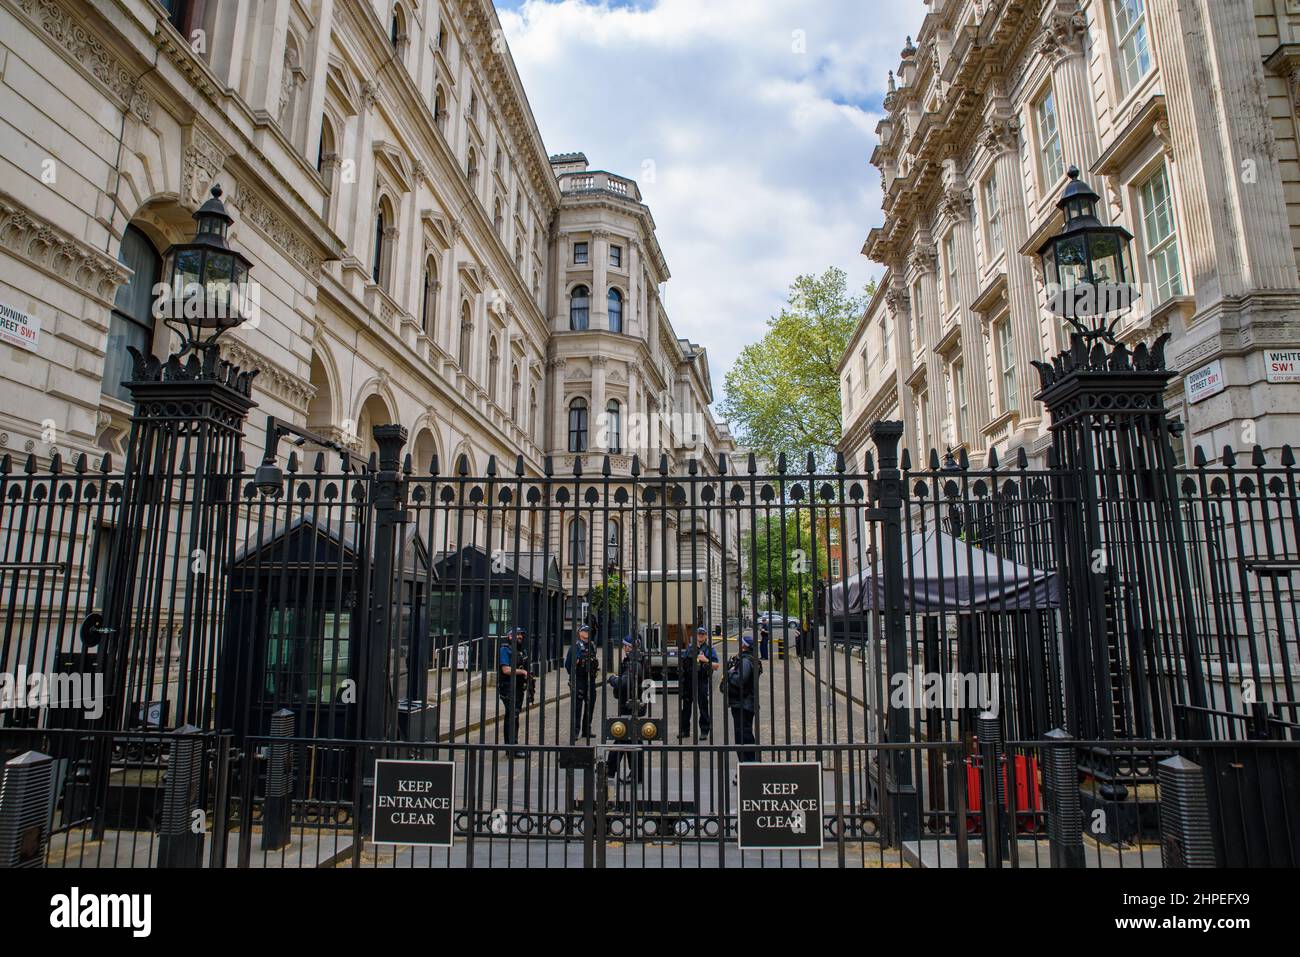 Downing Street, where the office of British Prime Minister is located, in London, United Kingdom Stock Photo